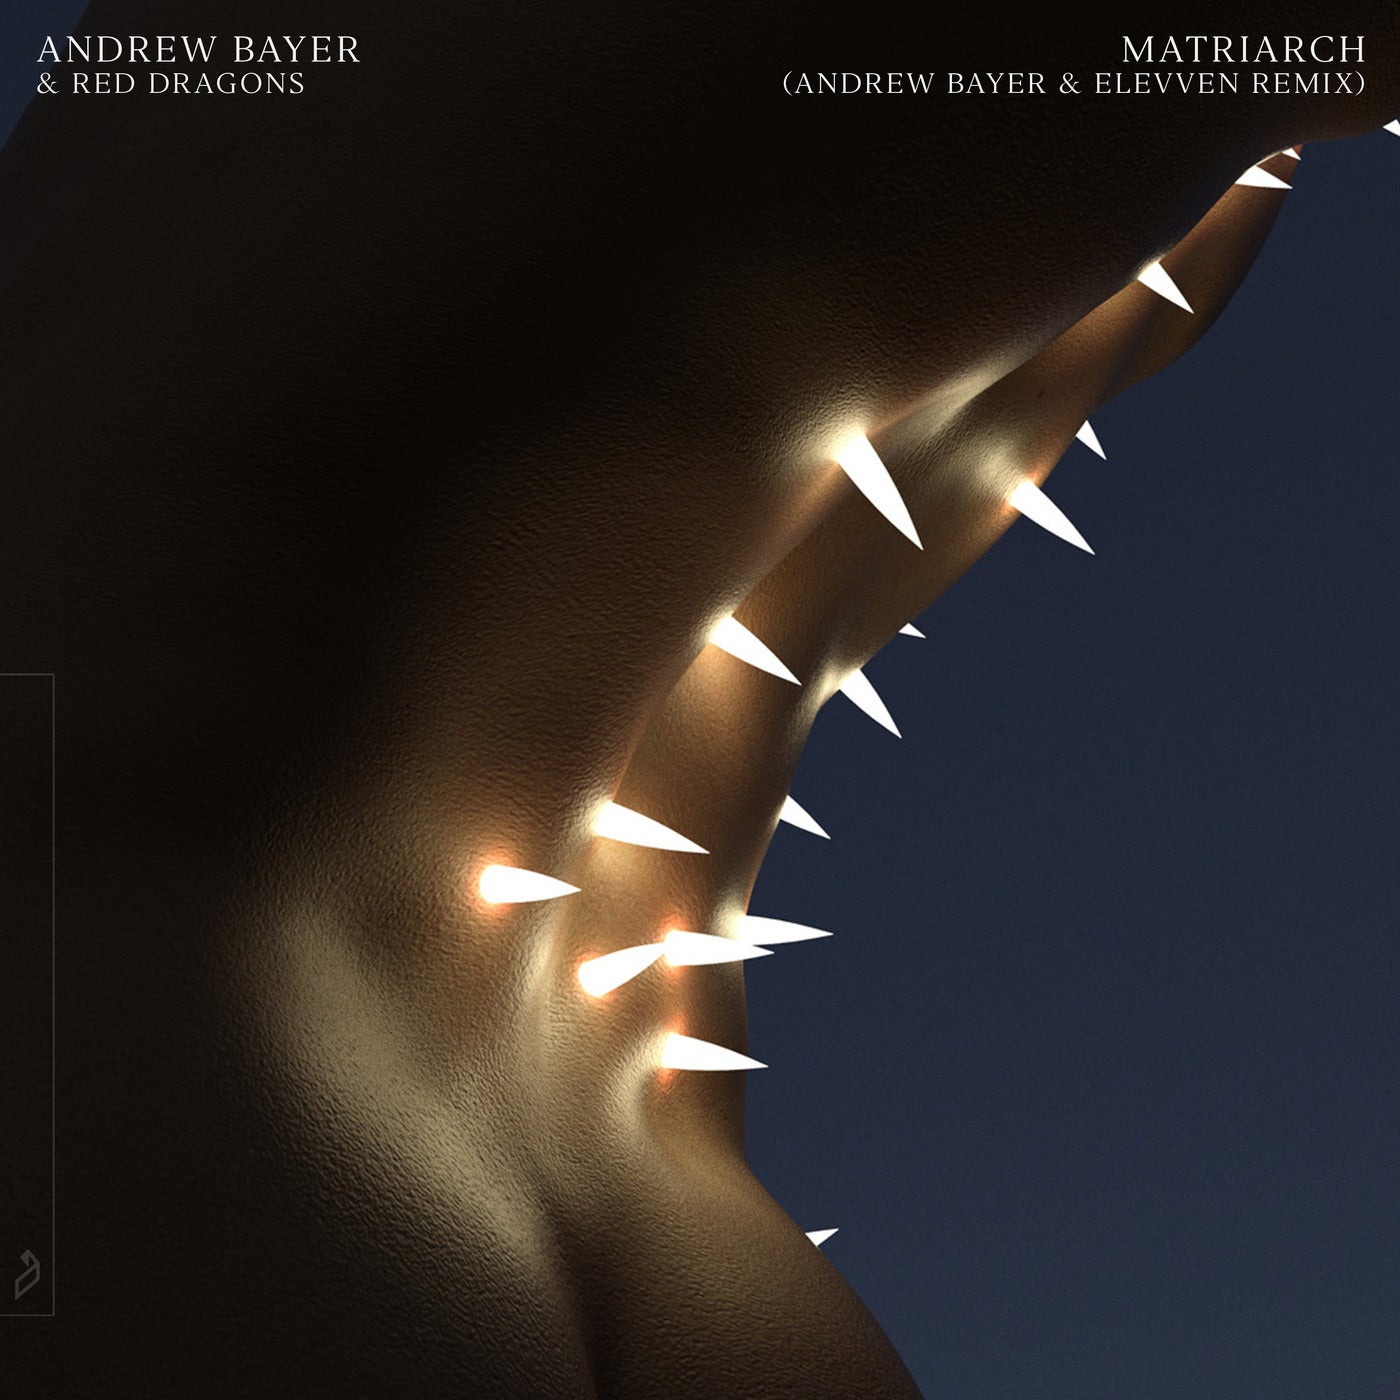 Andrew Bayer, Red Dragons – Matriarch (Andrew Bayer & Elevven Remix) [ANJ890BD]